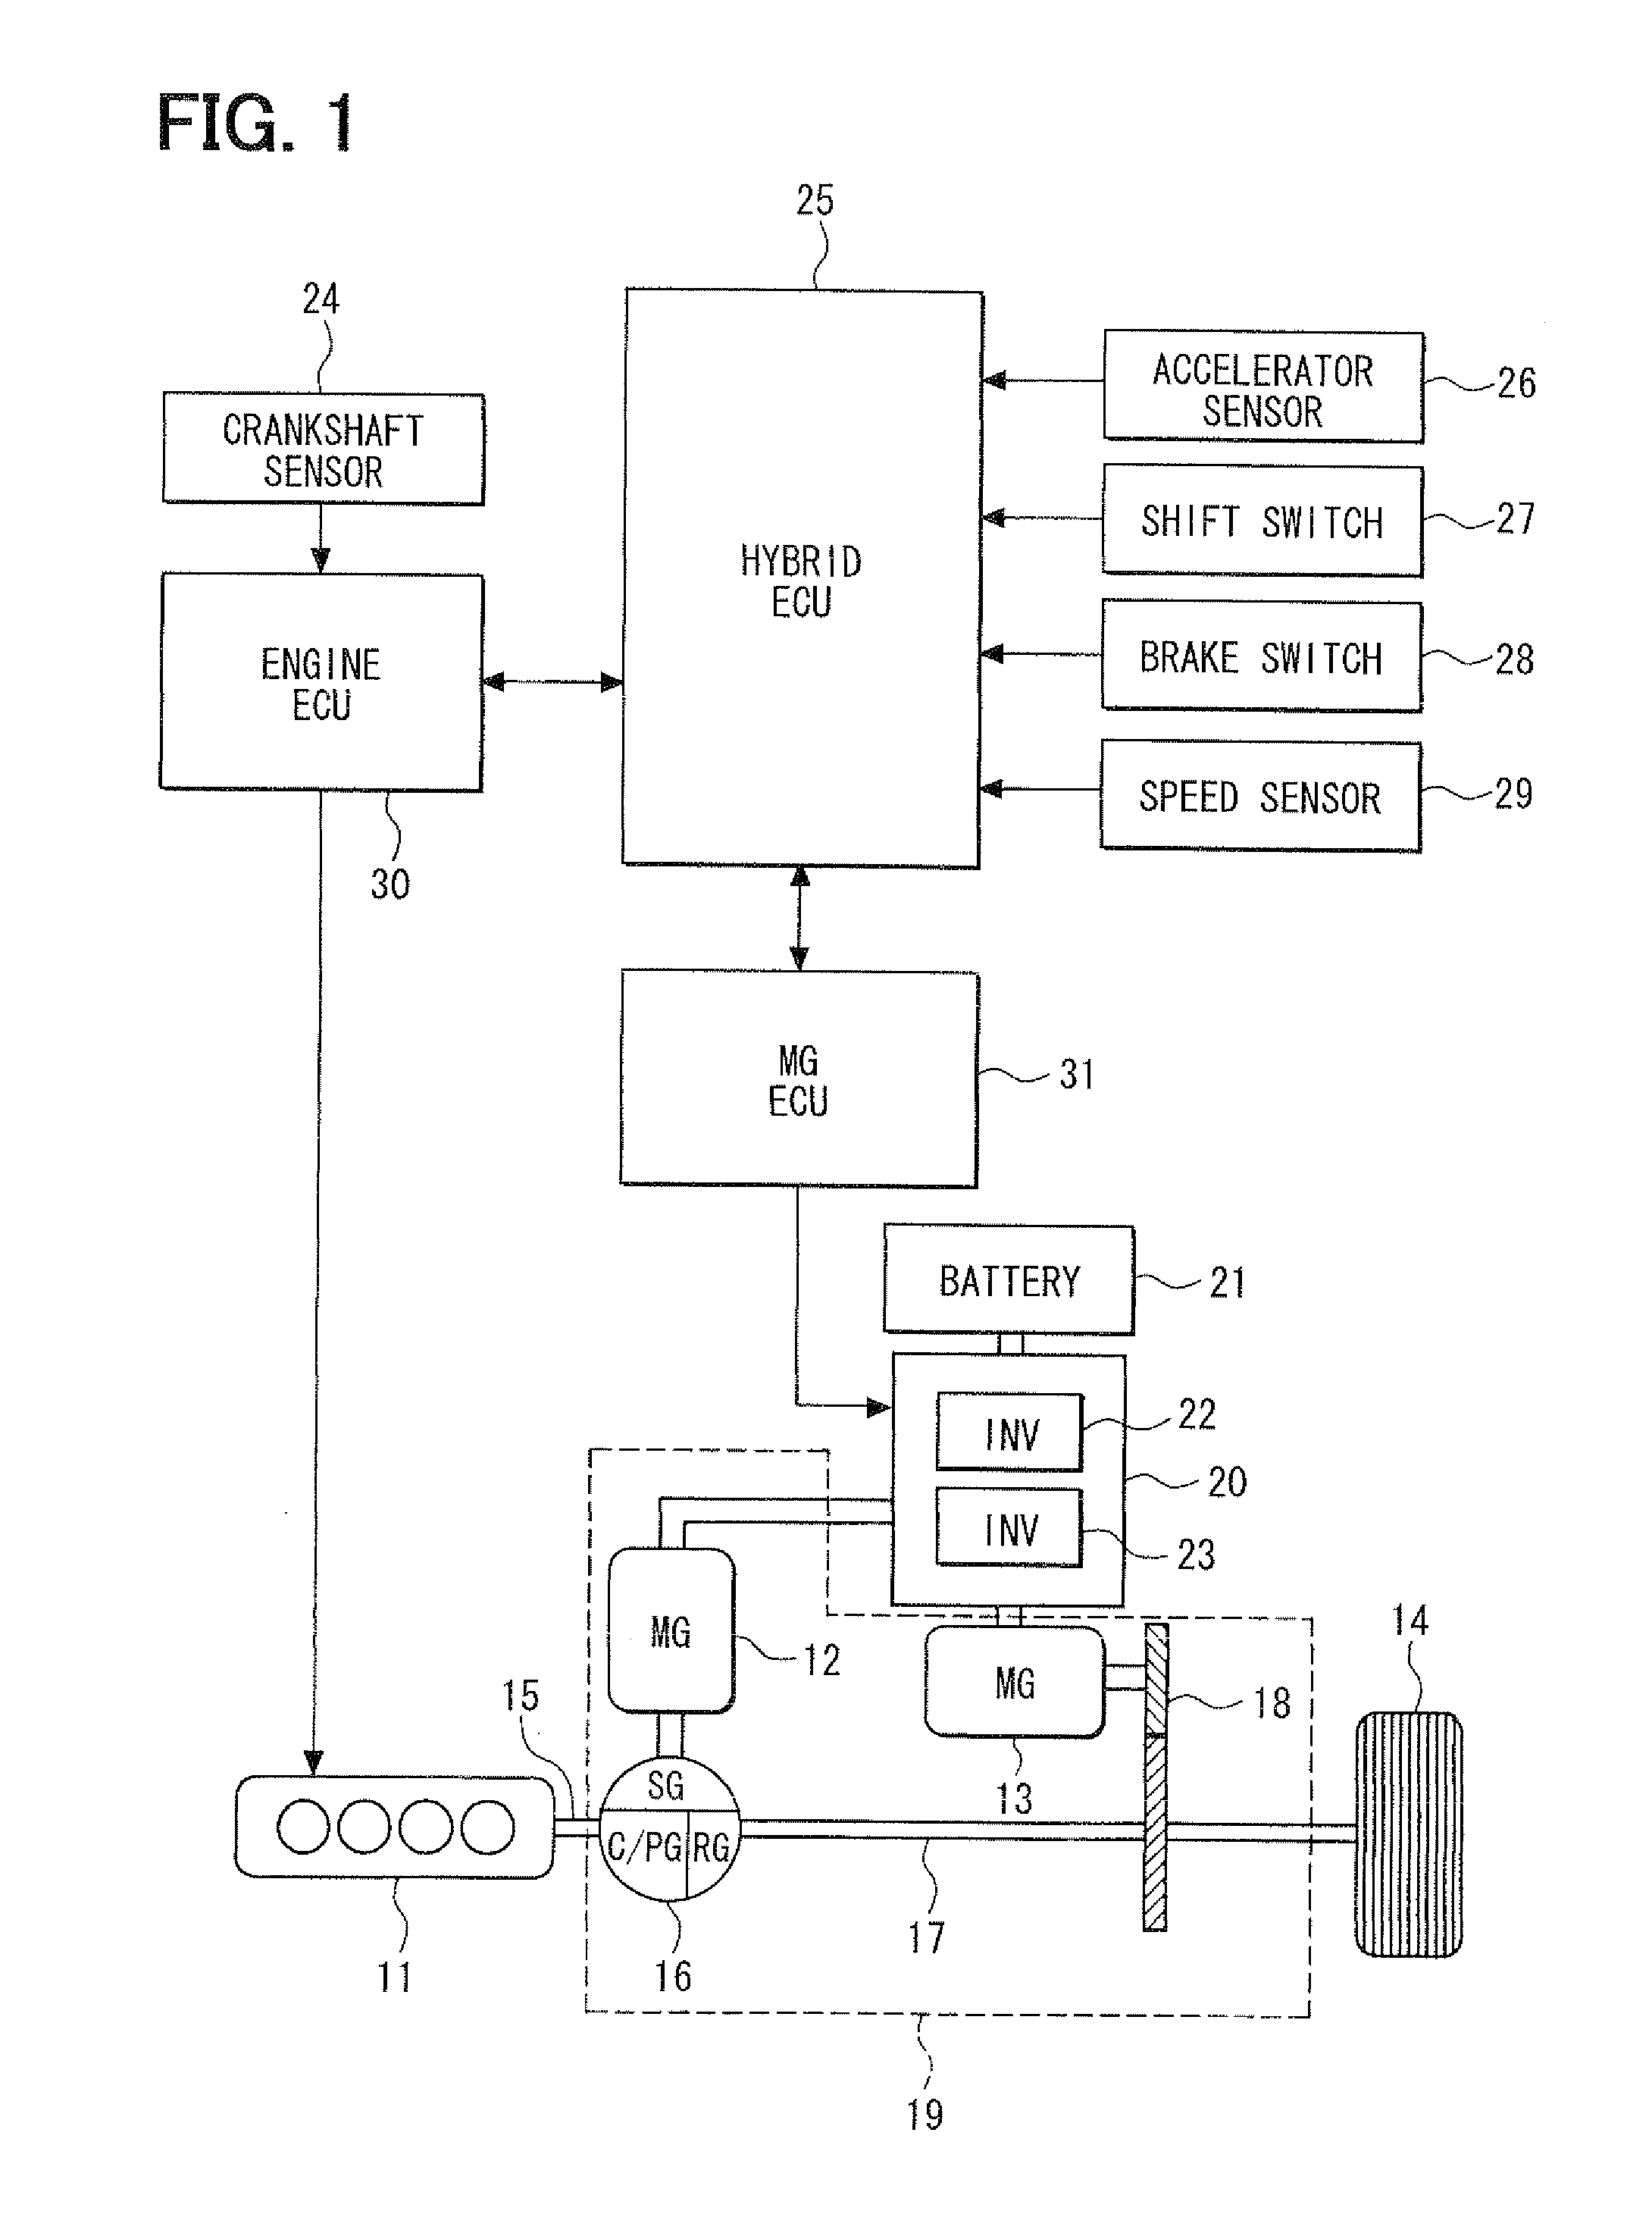 Control apparatus for vehicle drive system